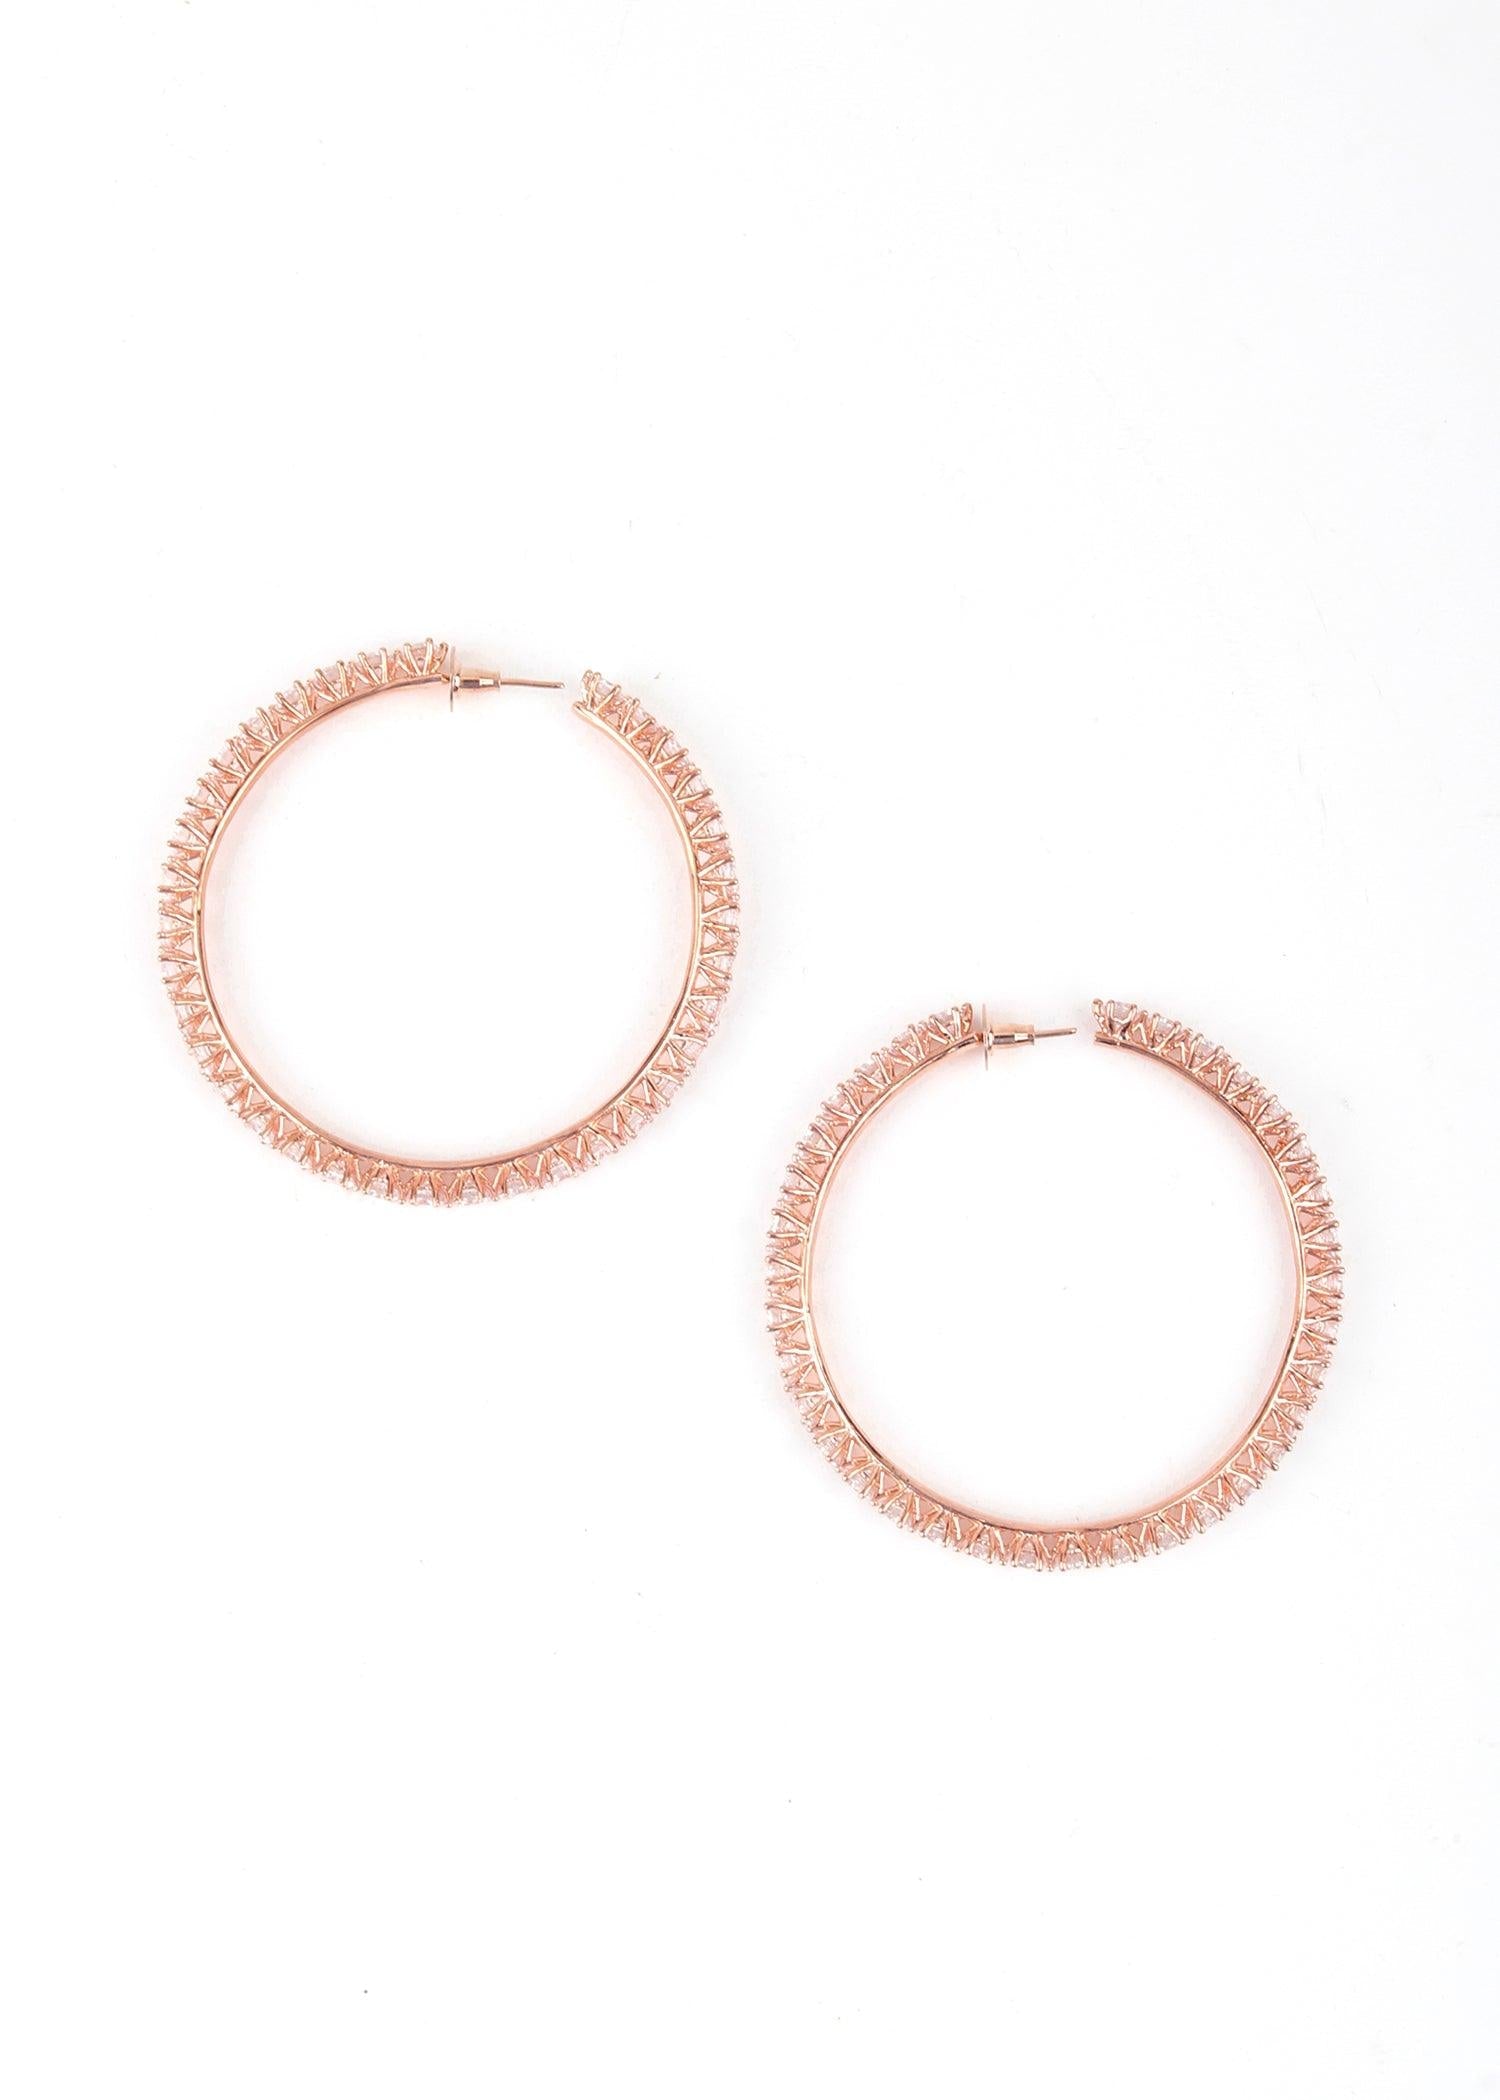 Women's Round Large Rose Gold Tone Hoops! - Odette